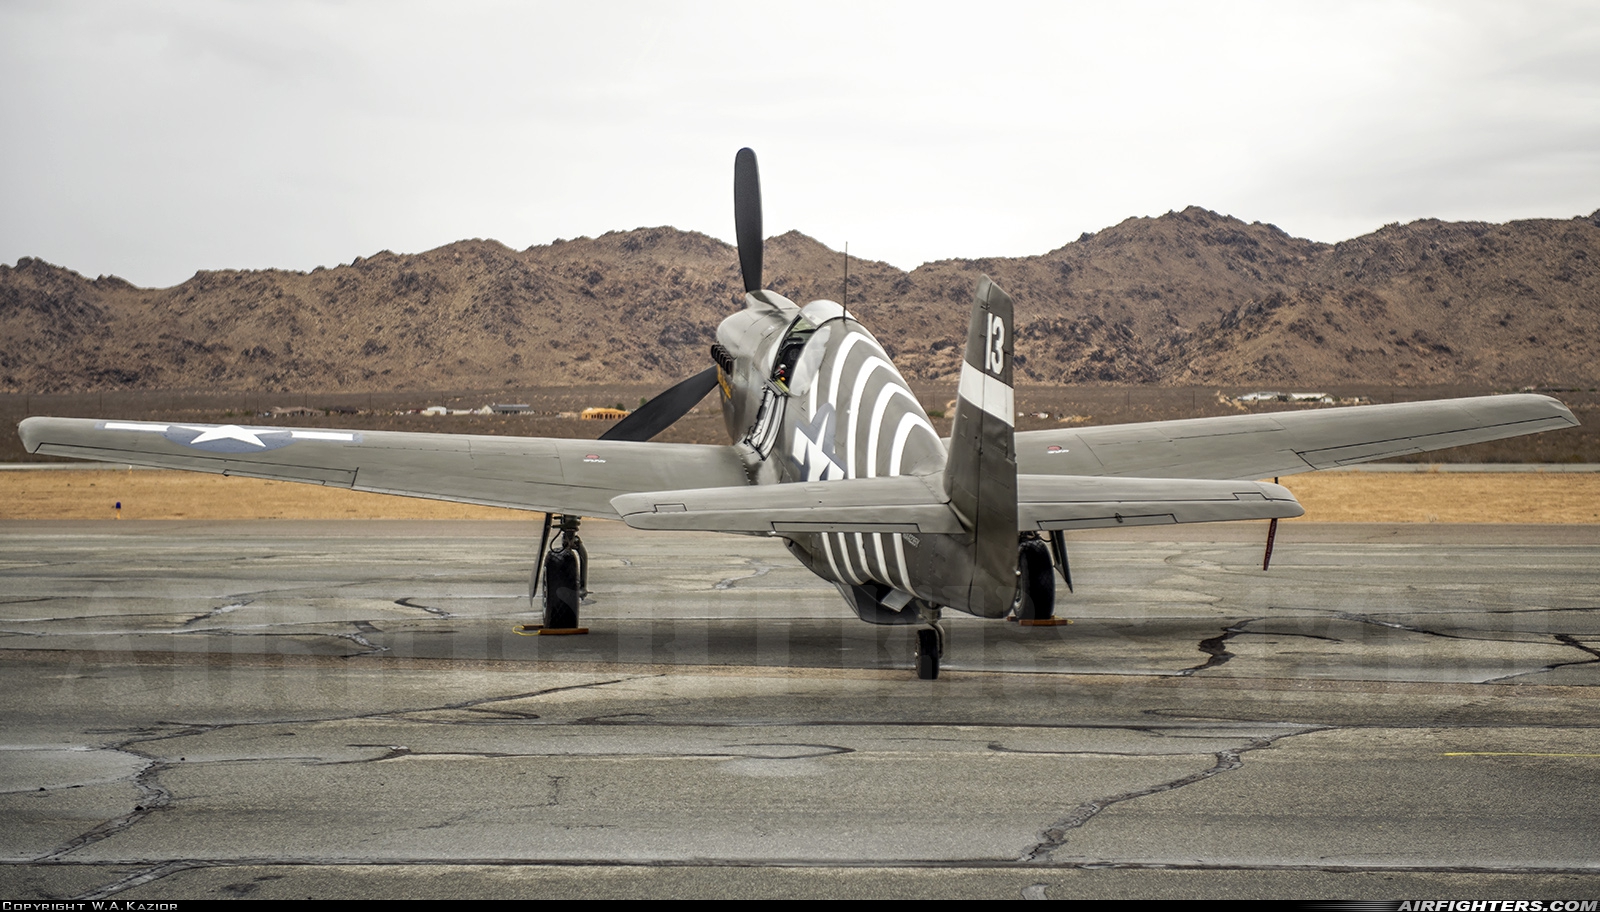 Private - Planes of Fame Air Museum North American P-51A Mustang NX4235Y at Apple Valley (APV / KAPV), USA